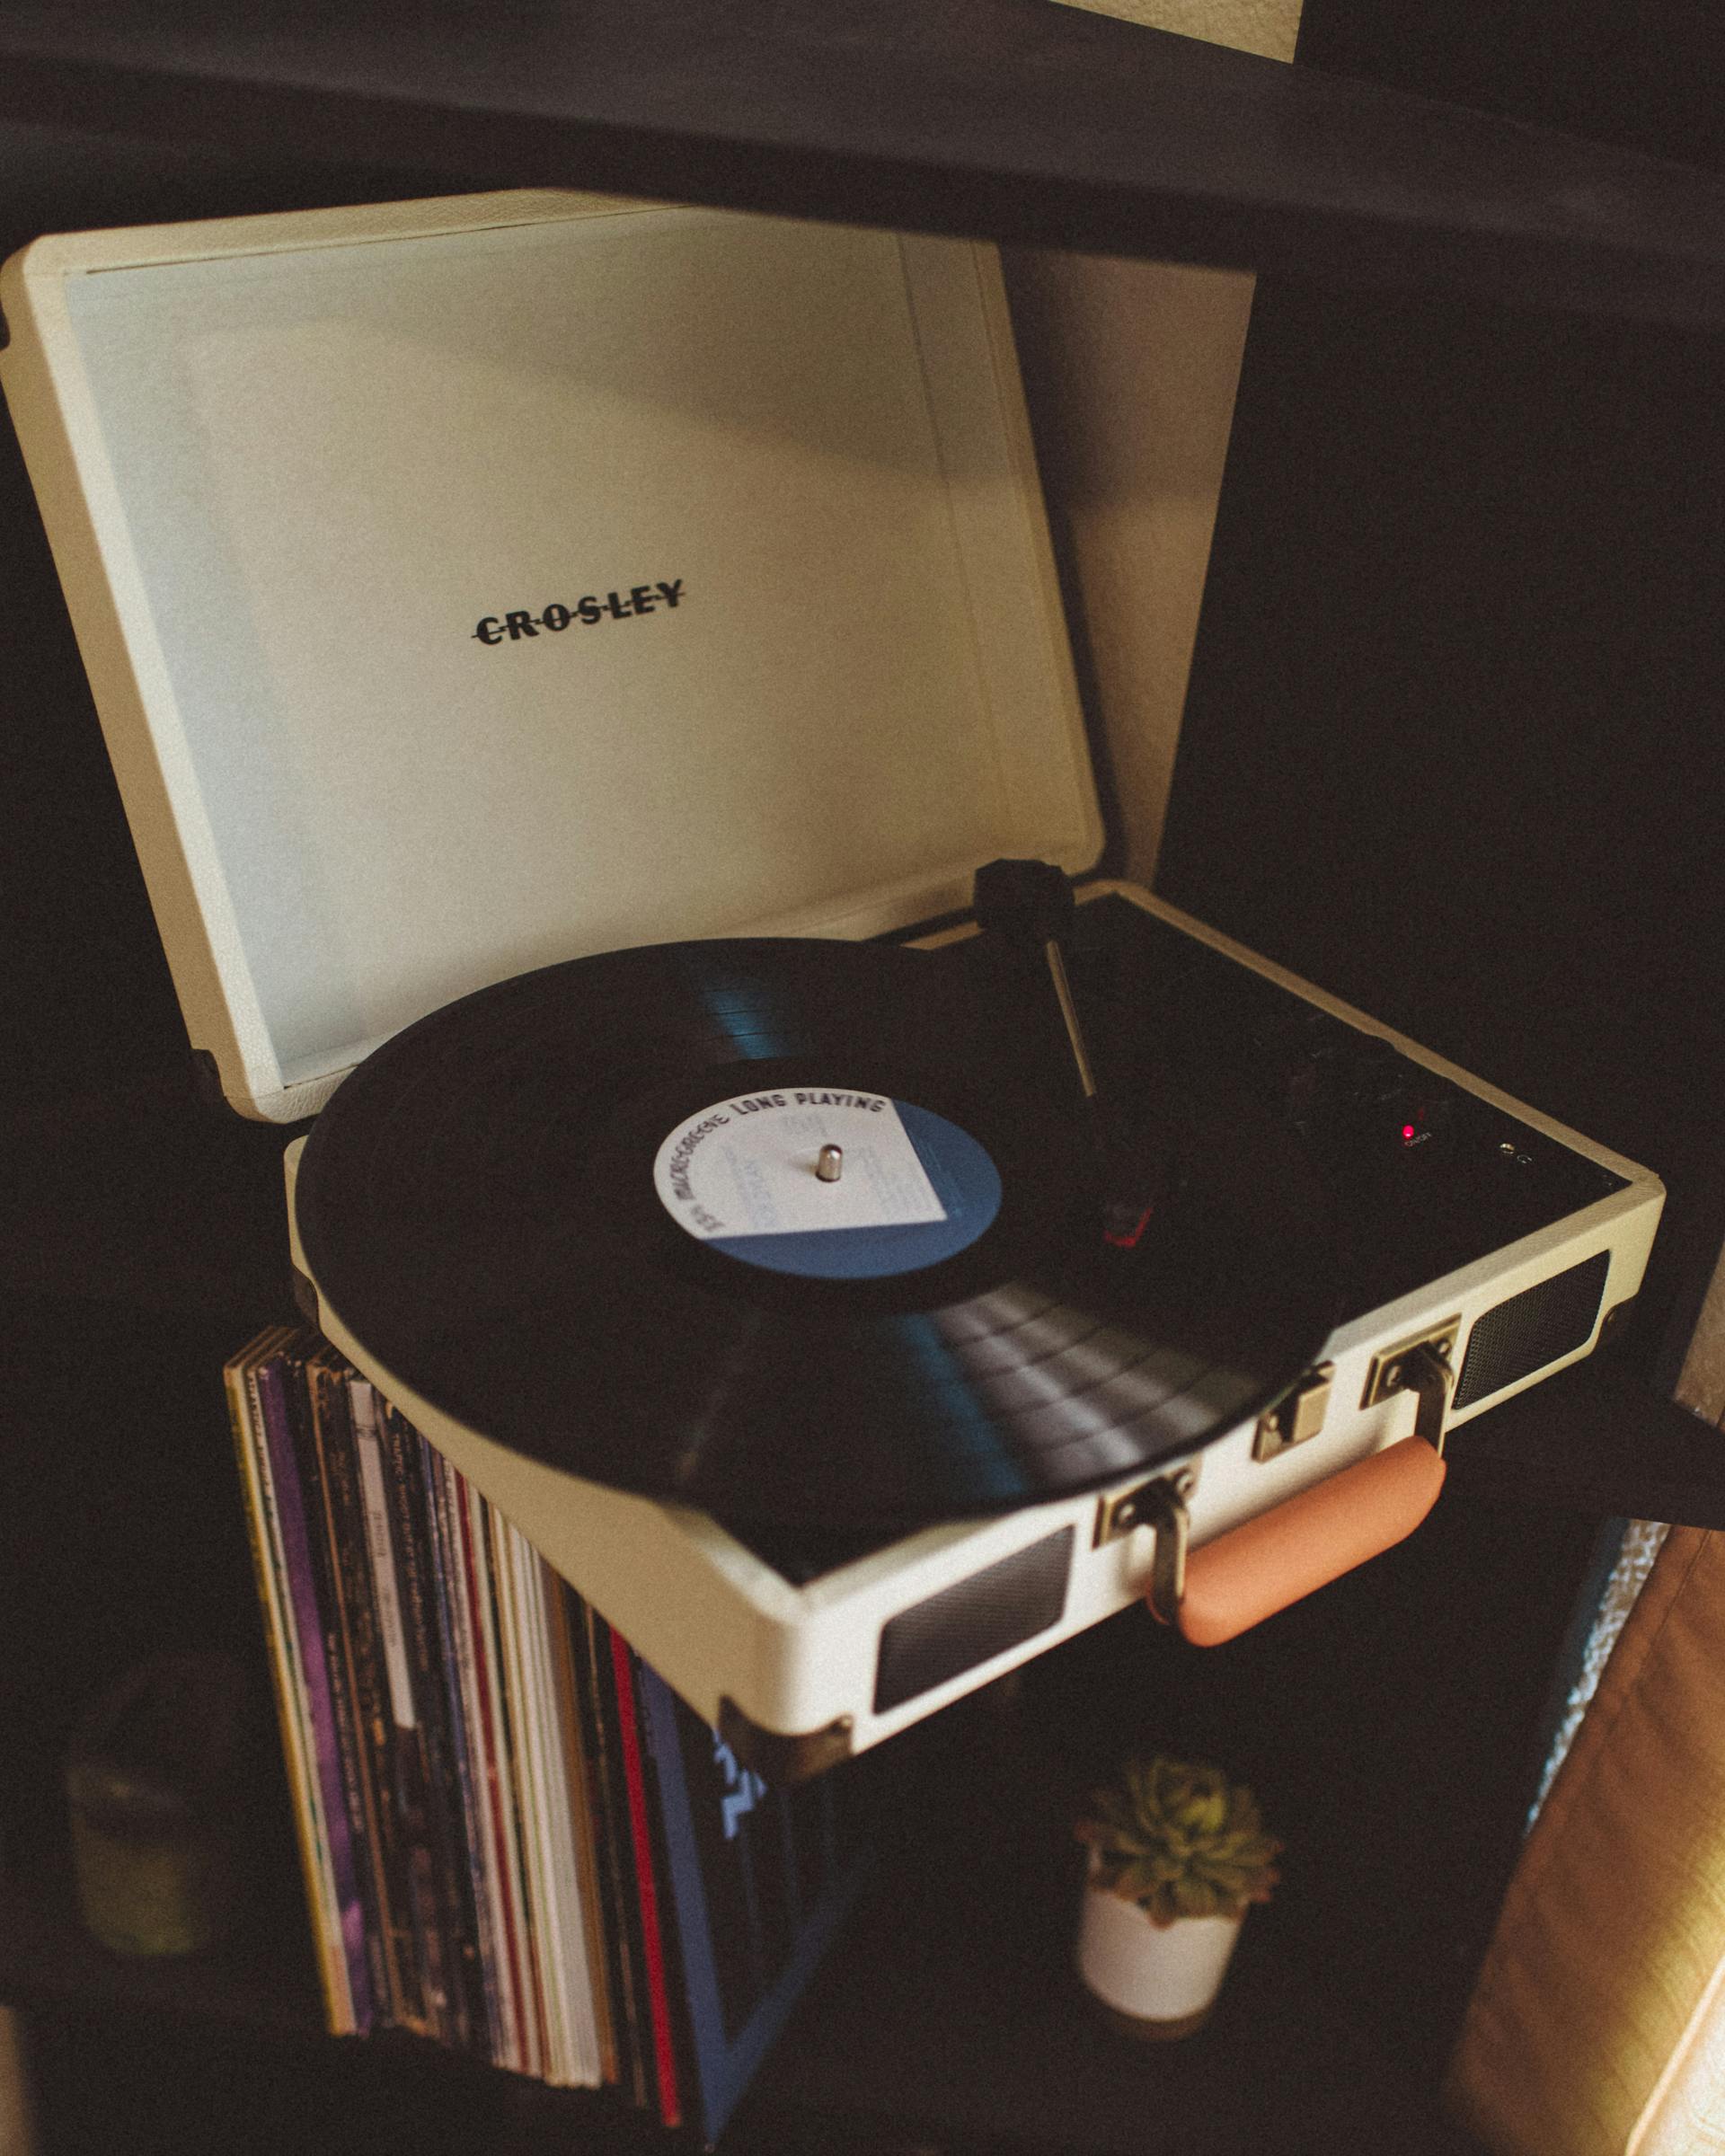 An old record player | Source: Pexels